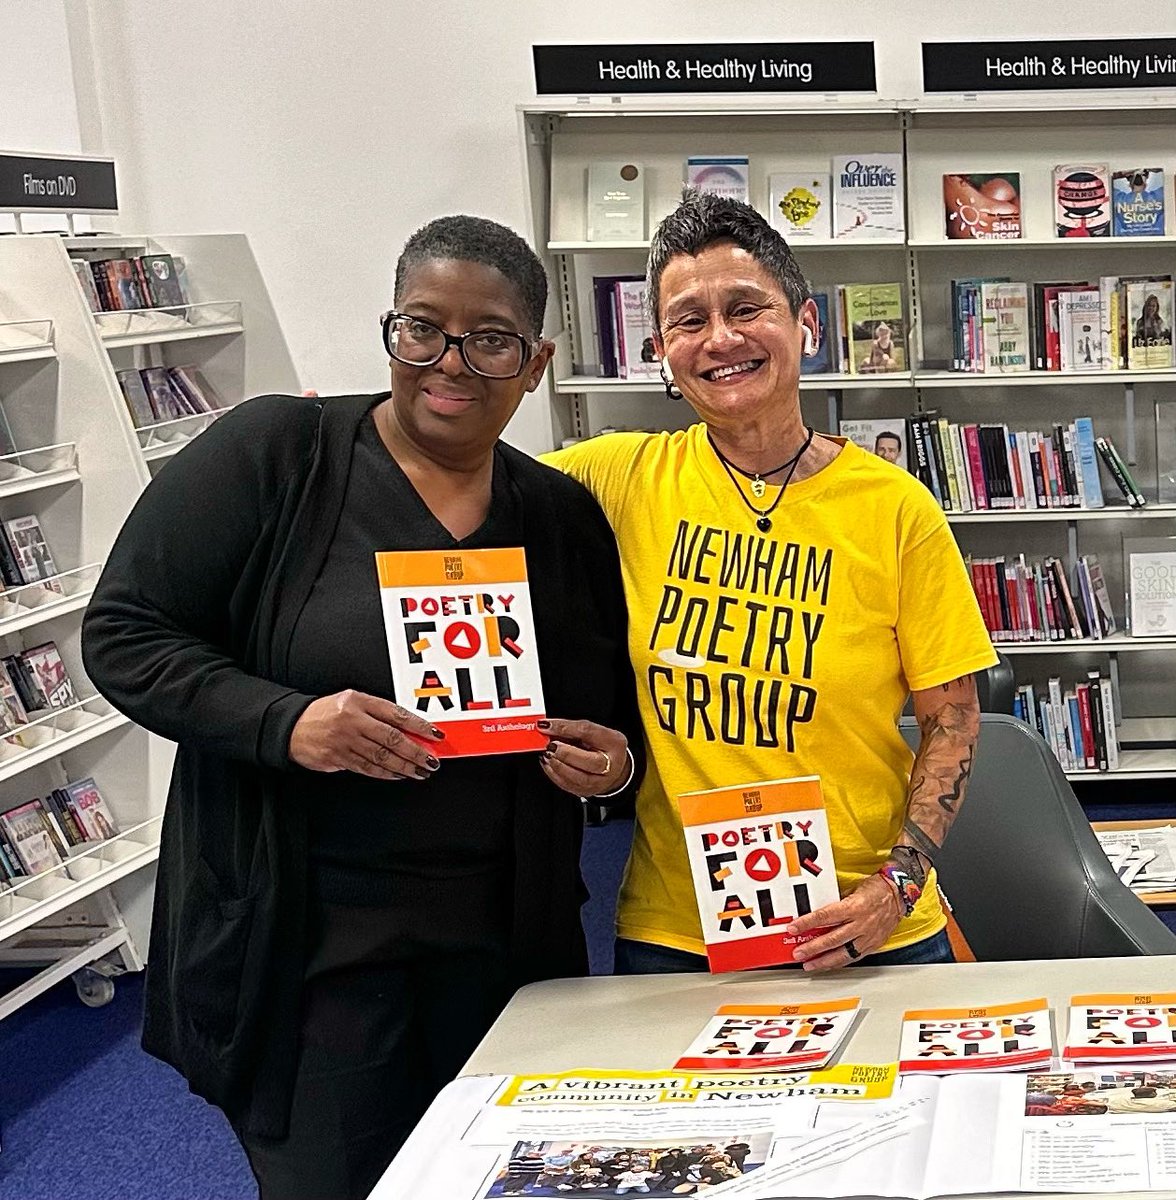 Weekly Poetry Sessions at #StratfordLibrary as part of our #NewhamPoetryFest  2024 Thanks to @ace__london 💪🏽💪🏽 #PoetryForAll  #NewhamArtCulture #poetryfest #newhampoets - More info? 👇🏽 Newhampoetrygroup@gmail.com